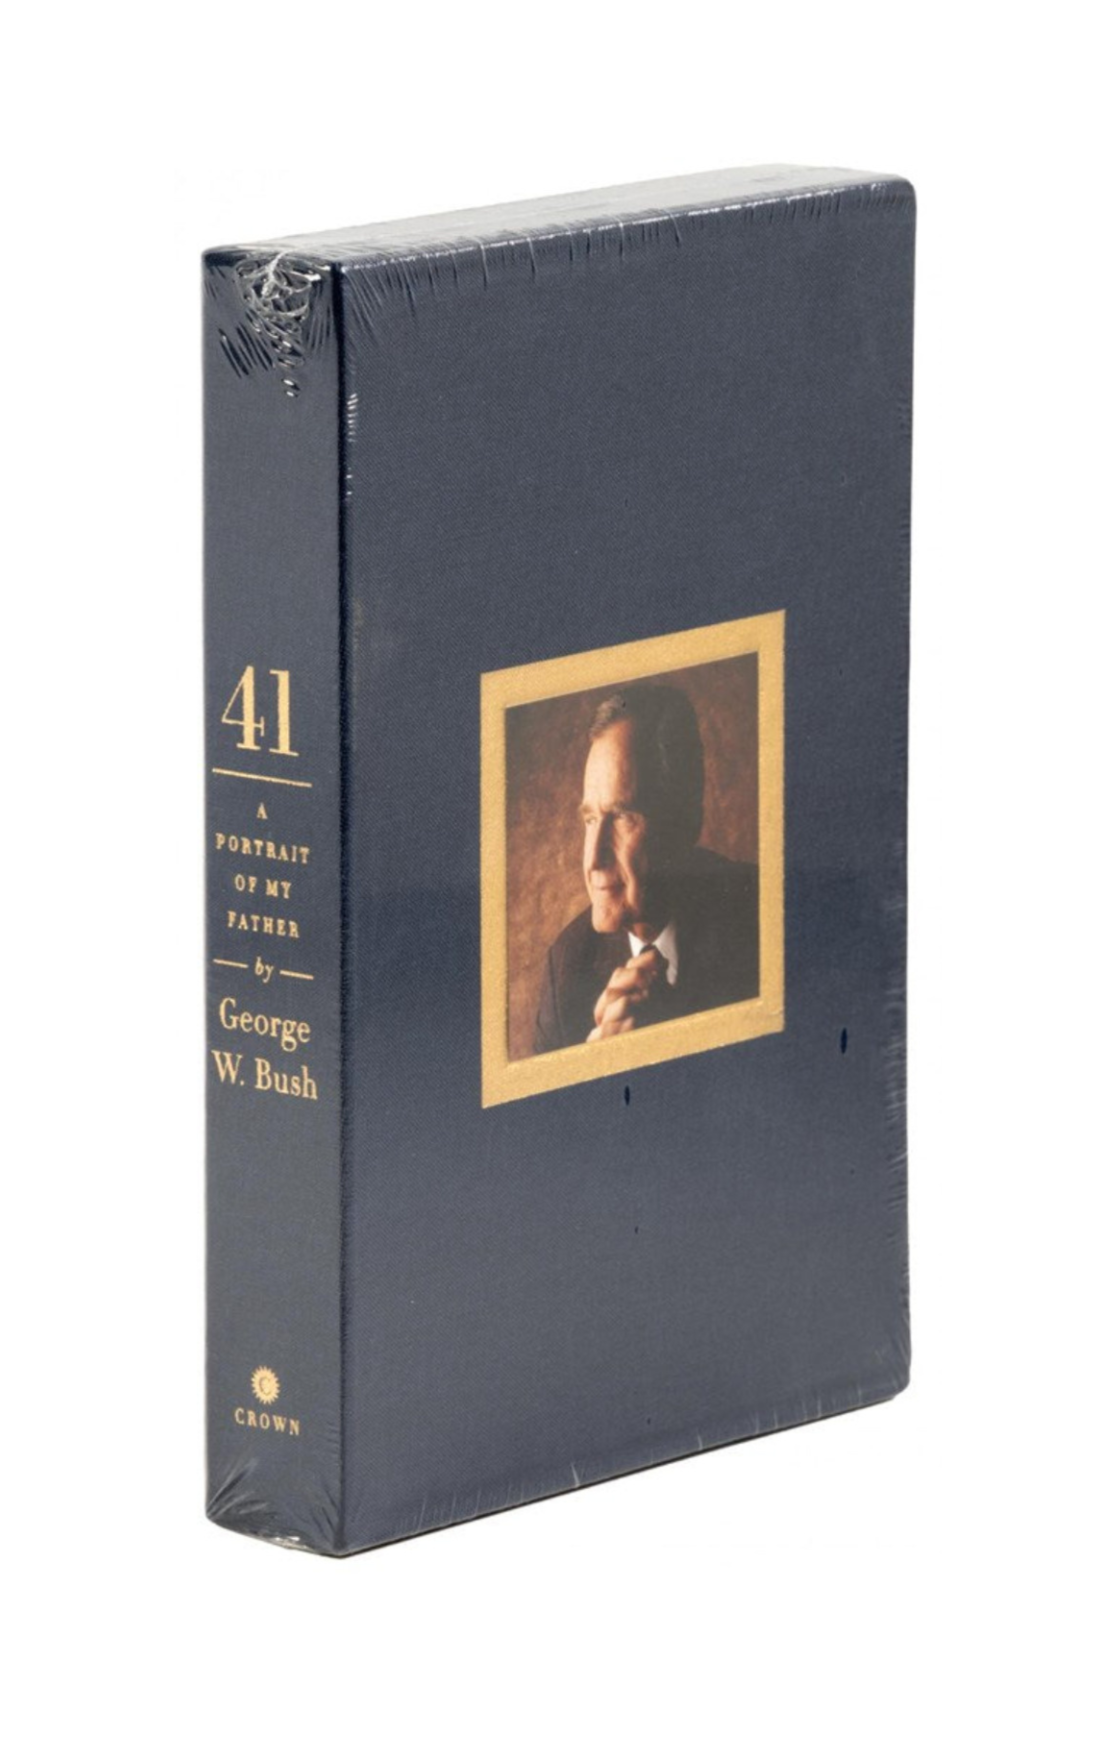 41: A Portrait of my Father, Signed by George W. Bush, First Limited Deluxe Edition, 2014